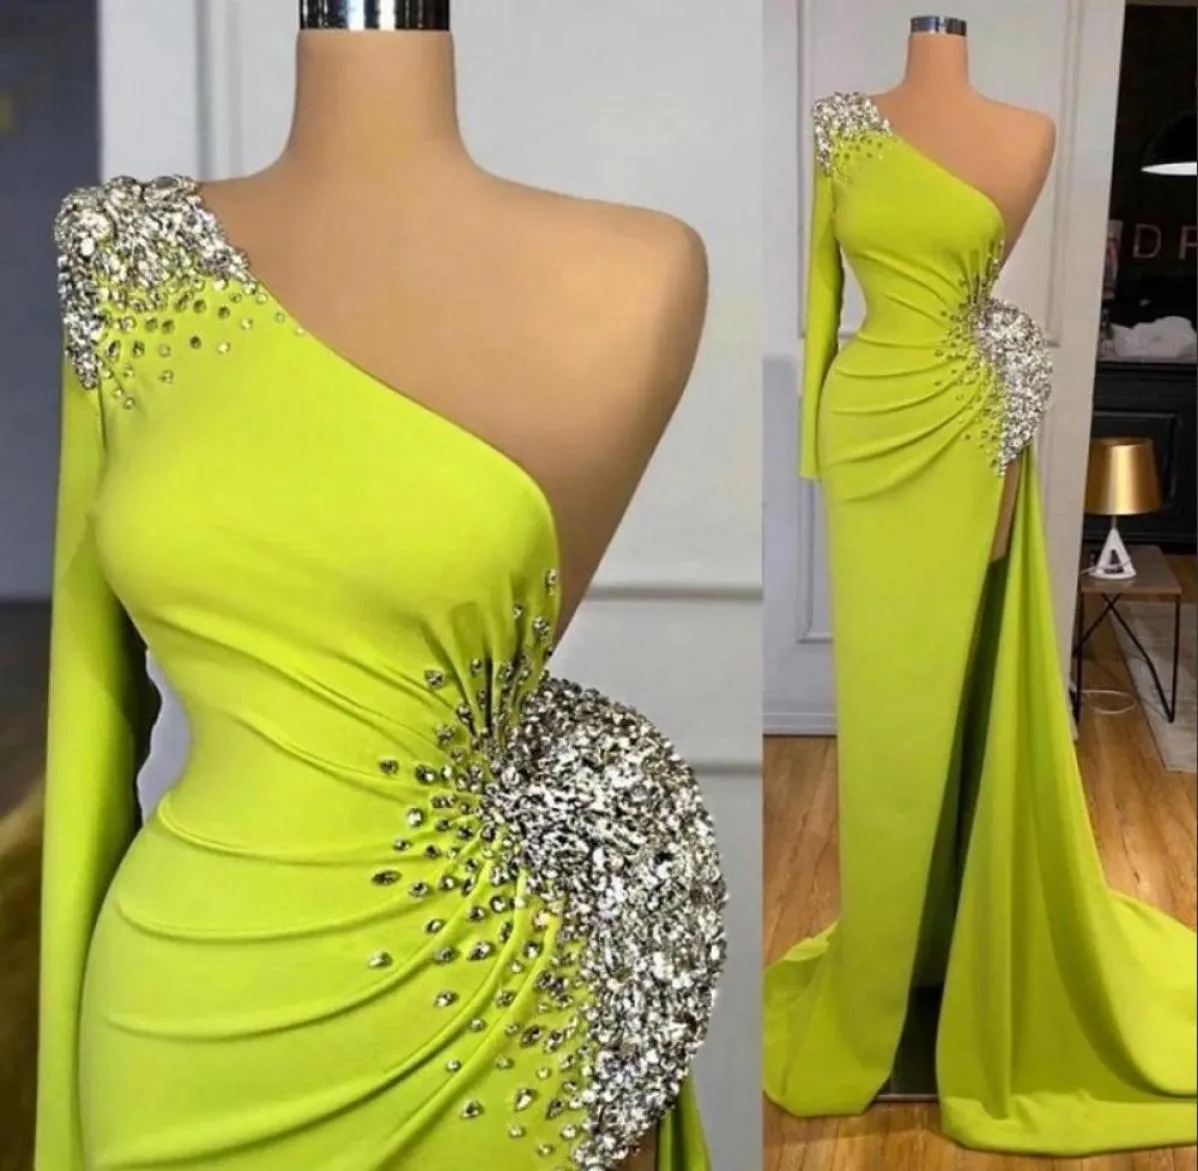 2022 Amazing Green One Shoulder Evening Dresses Wear Crystals Beaded Satin Mermaid High Split Sexy Women Dubai Formal Party Prom D5191428